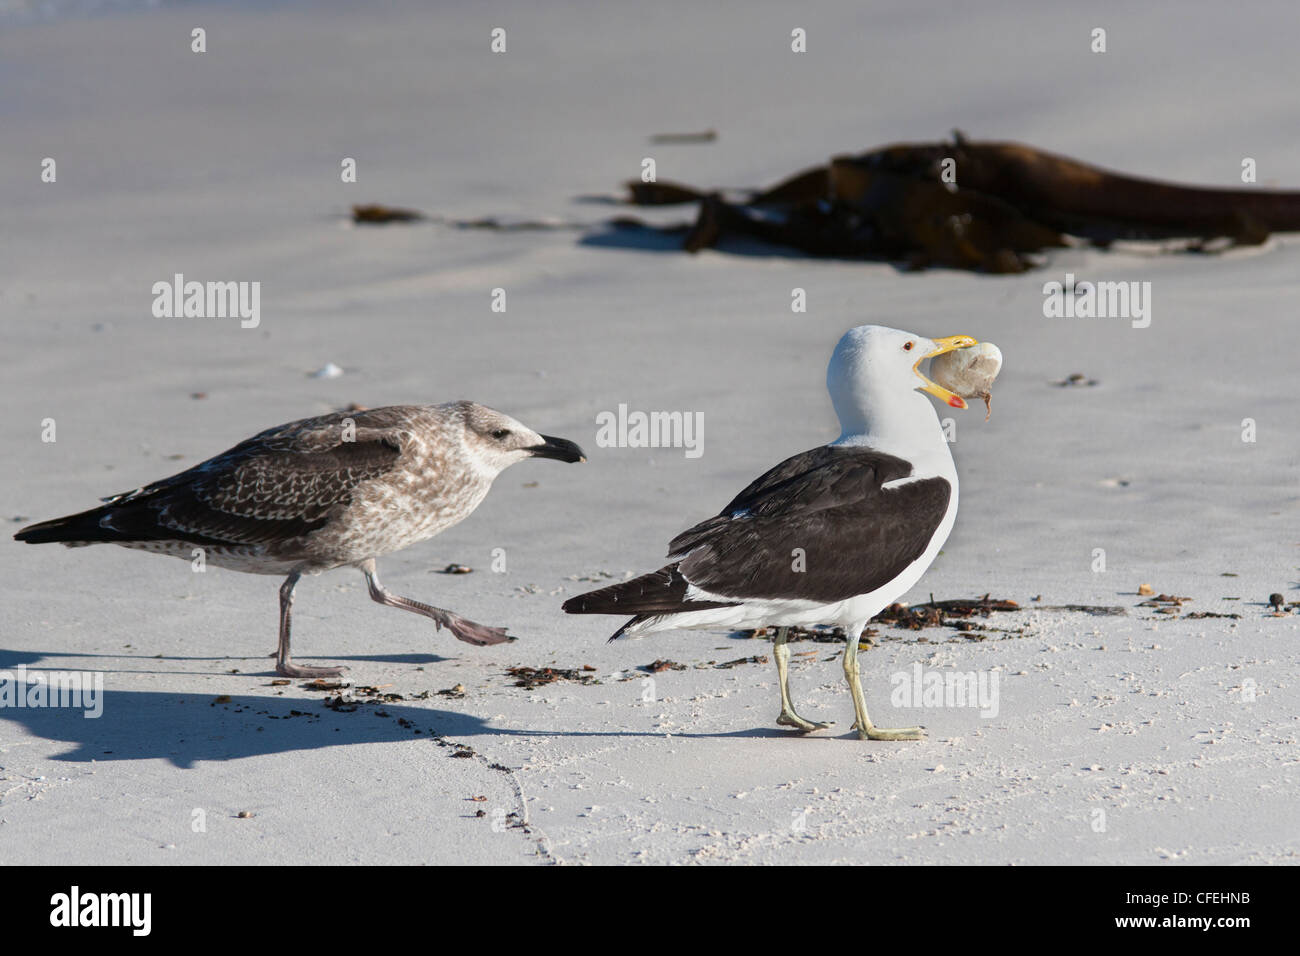 Cape gulls, Larus vetula, with African penguin egg, Table Mountain National Park, South Africa Stock Photo